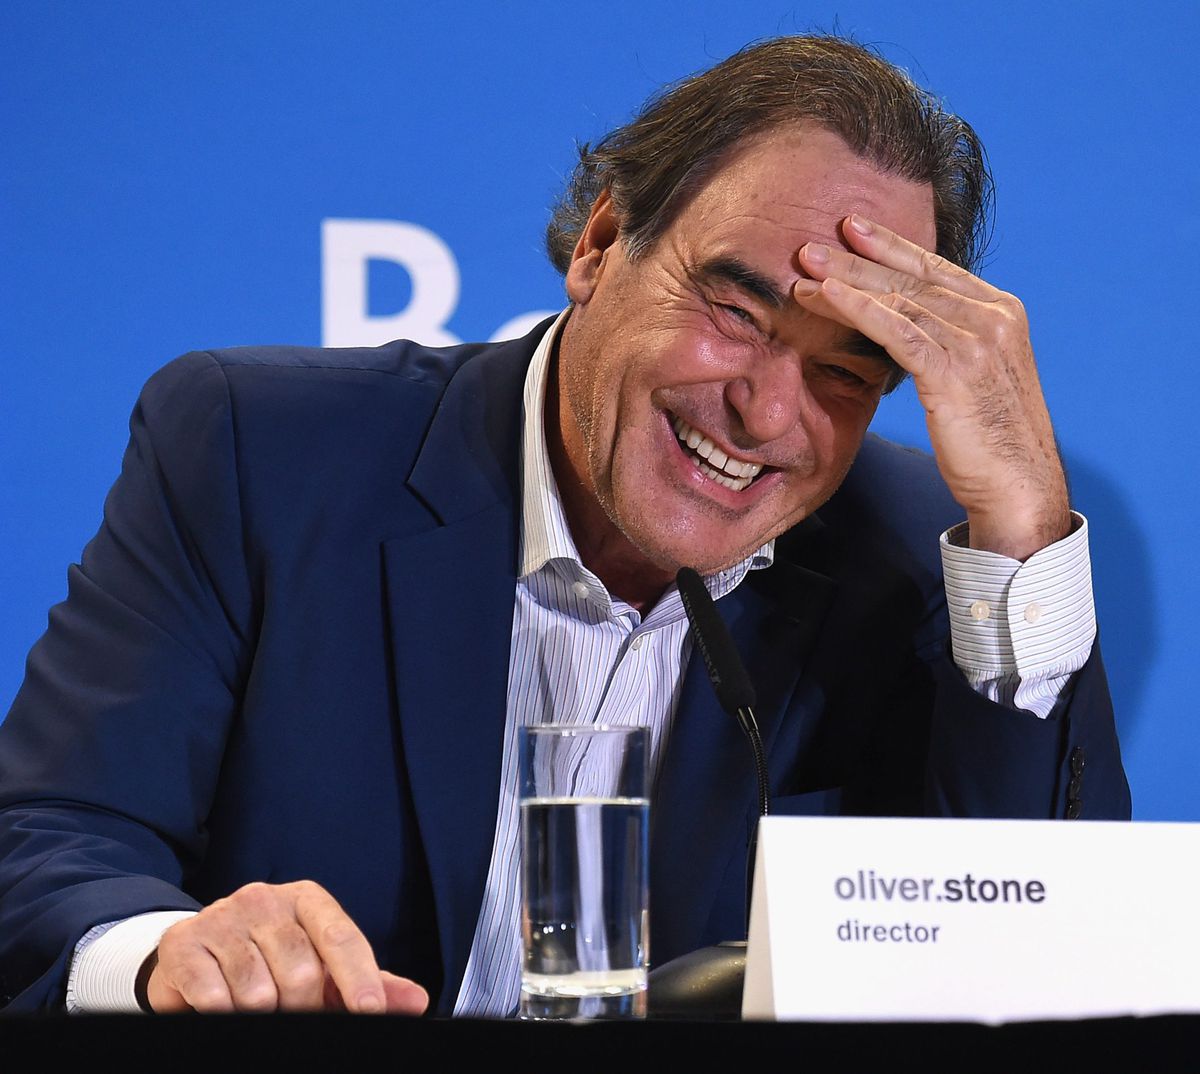 Oliver Stone speaks Saturday at the Toronto International Film Festival. | Kevin Winter/Getty Images